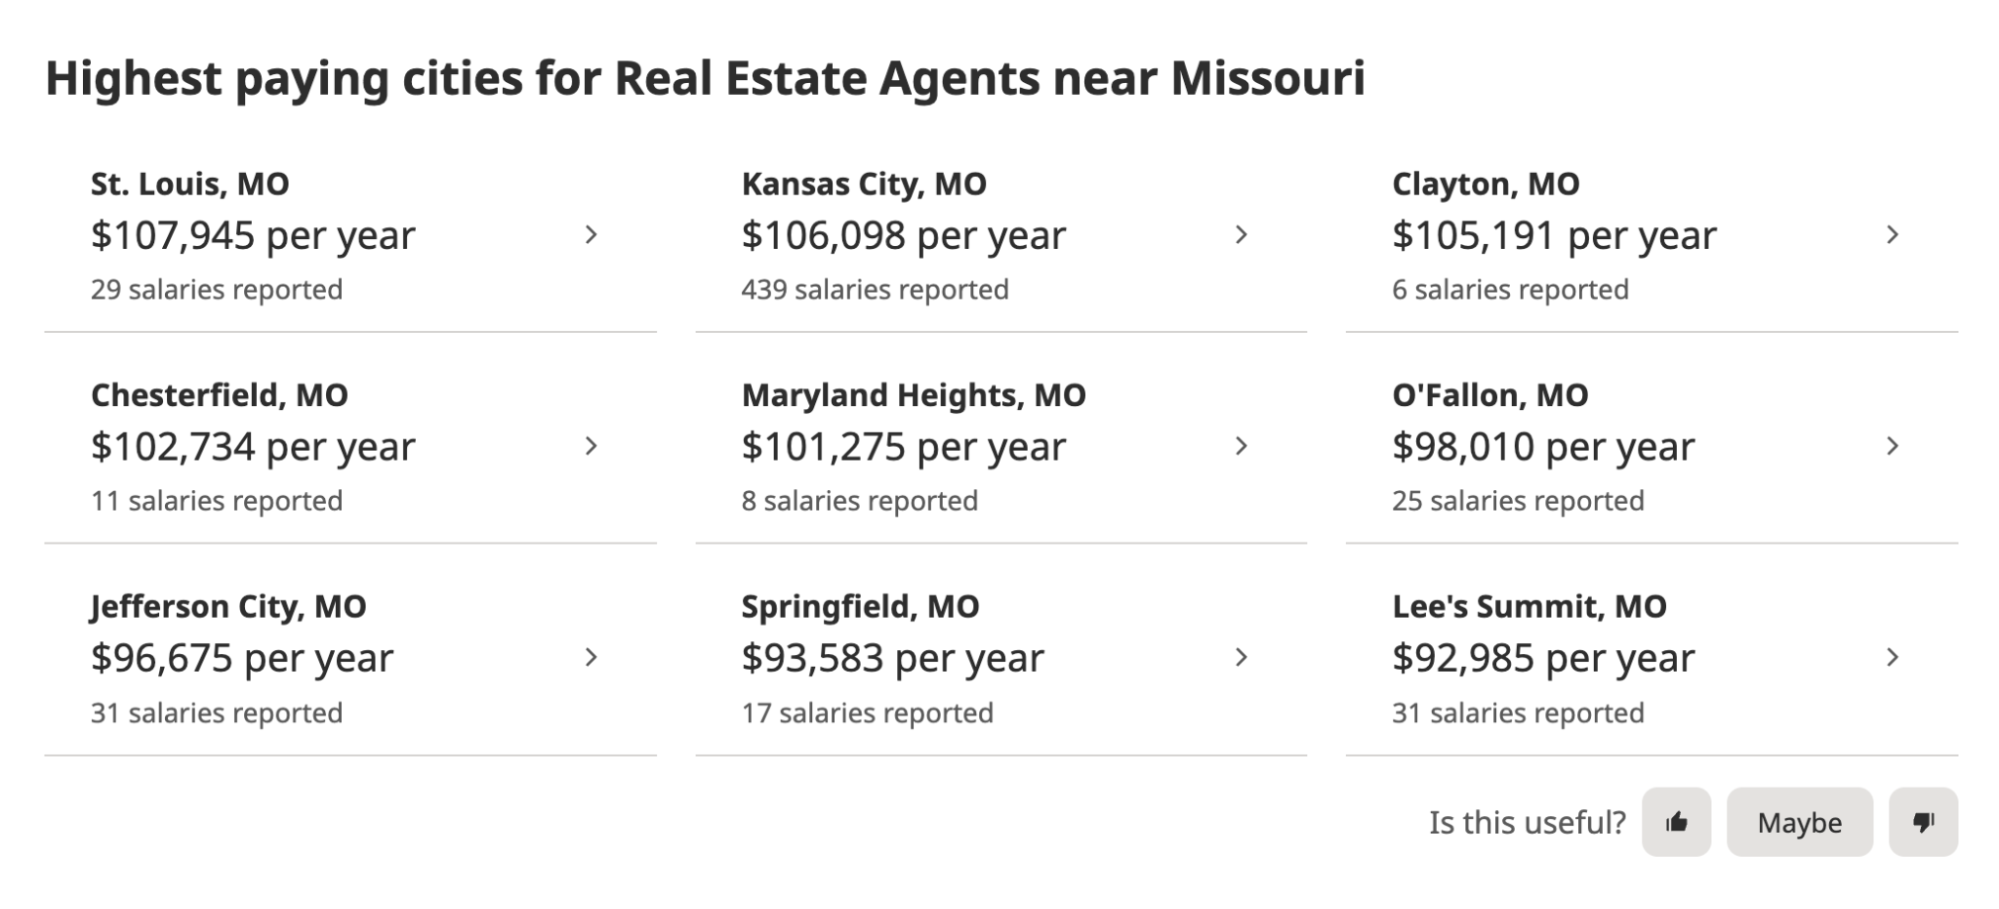 Information for highest paying cities for real estate agent in Missouri.